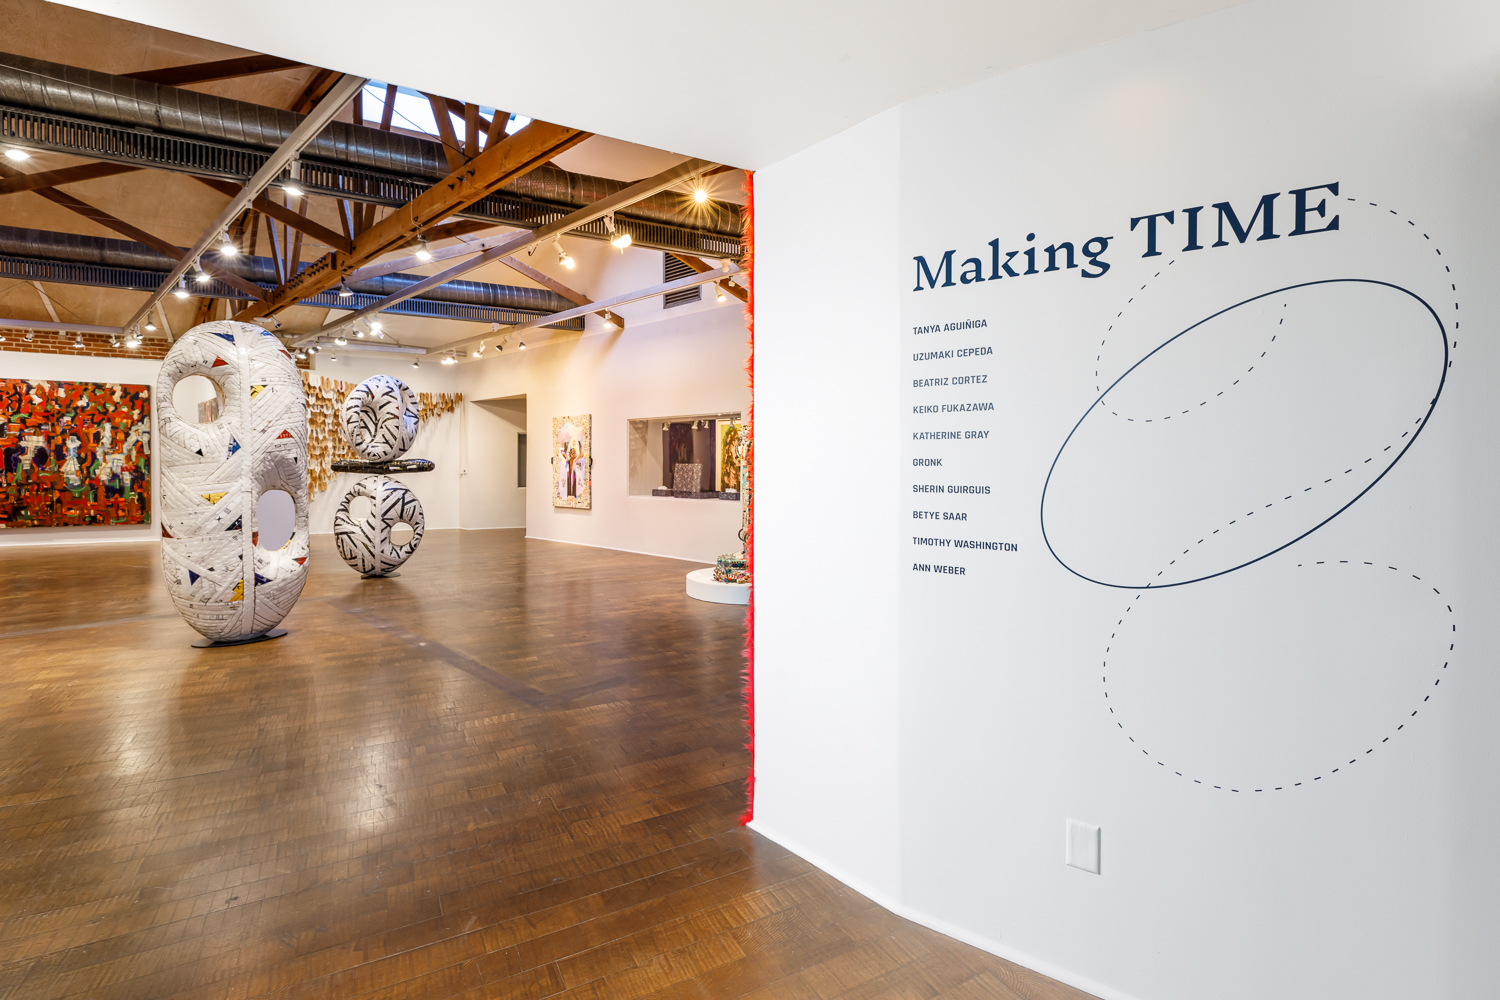 Making Time, installation view, 2021.